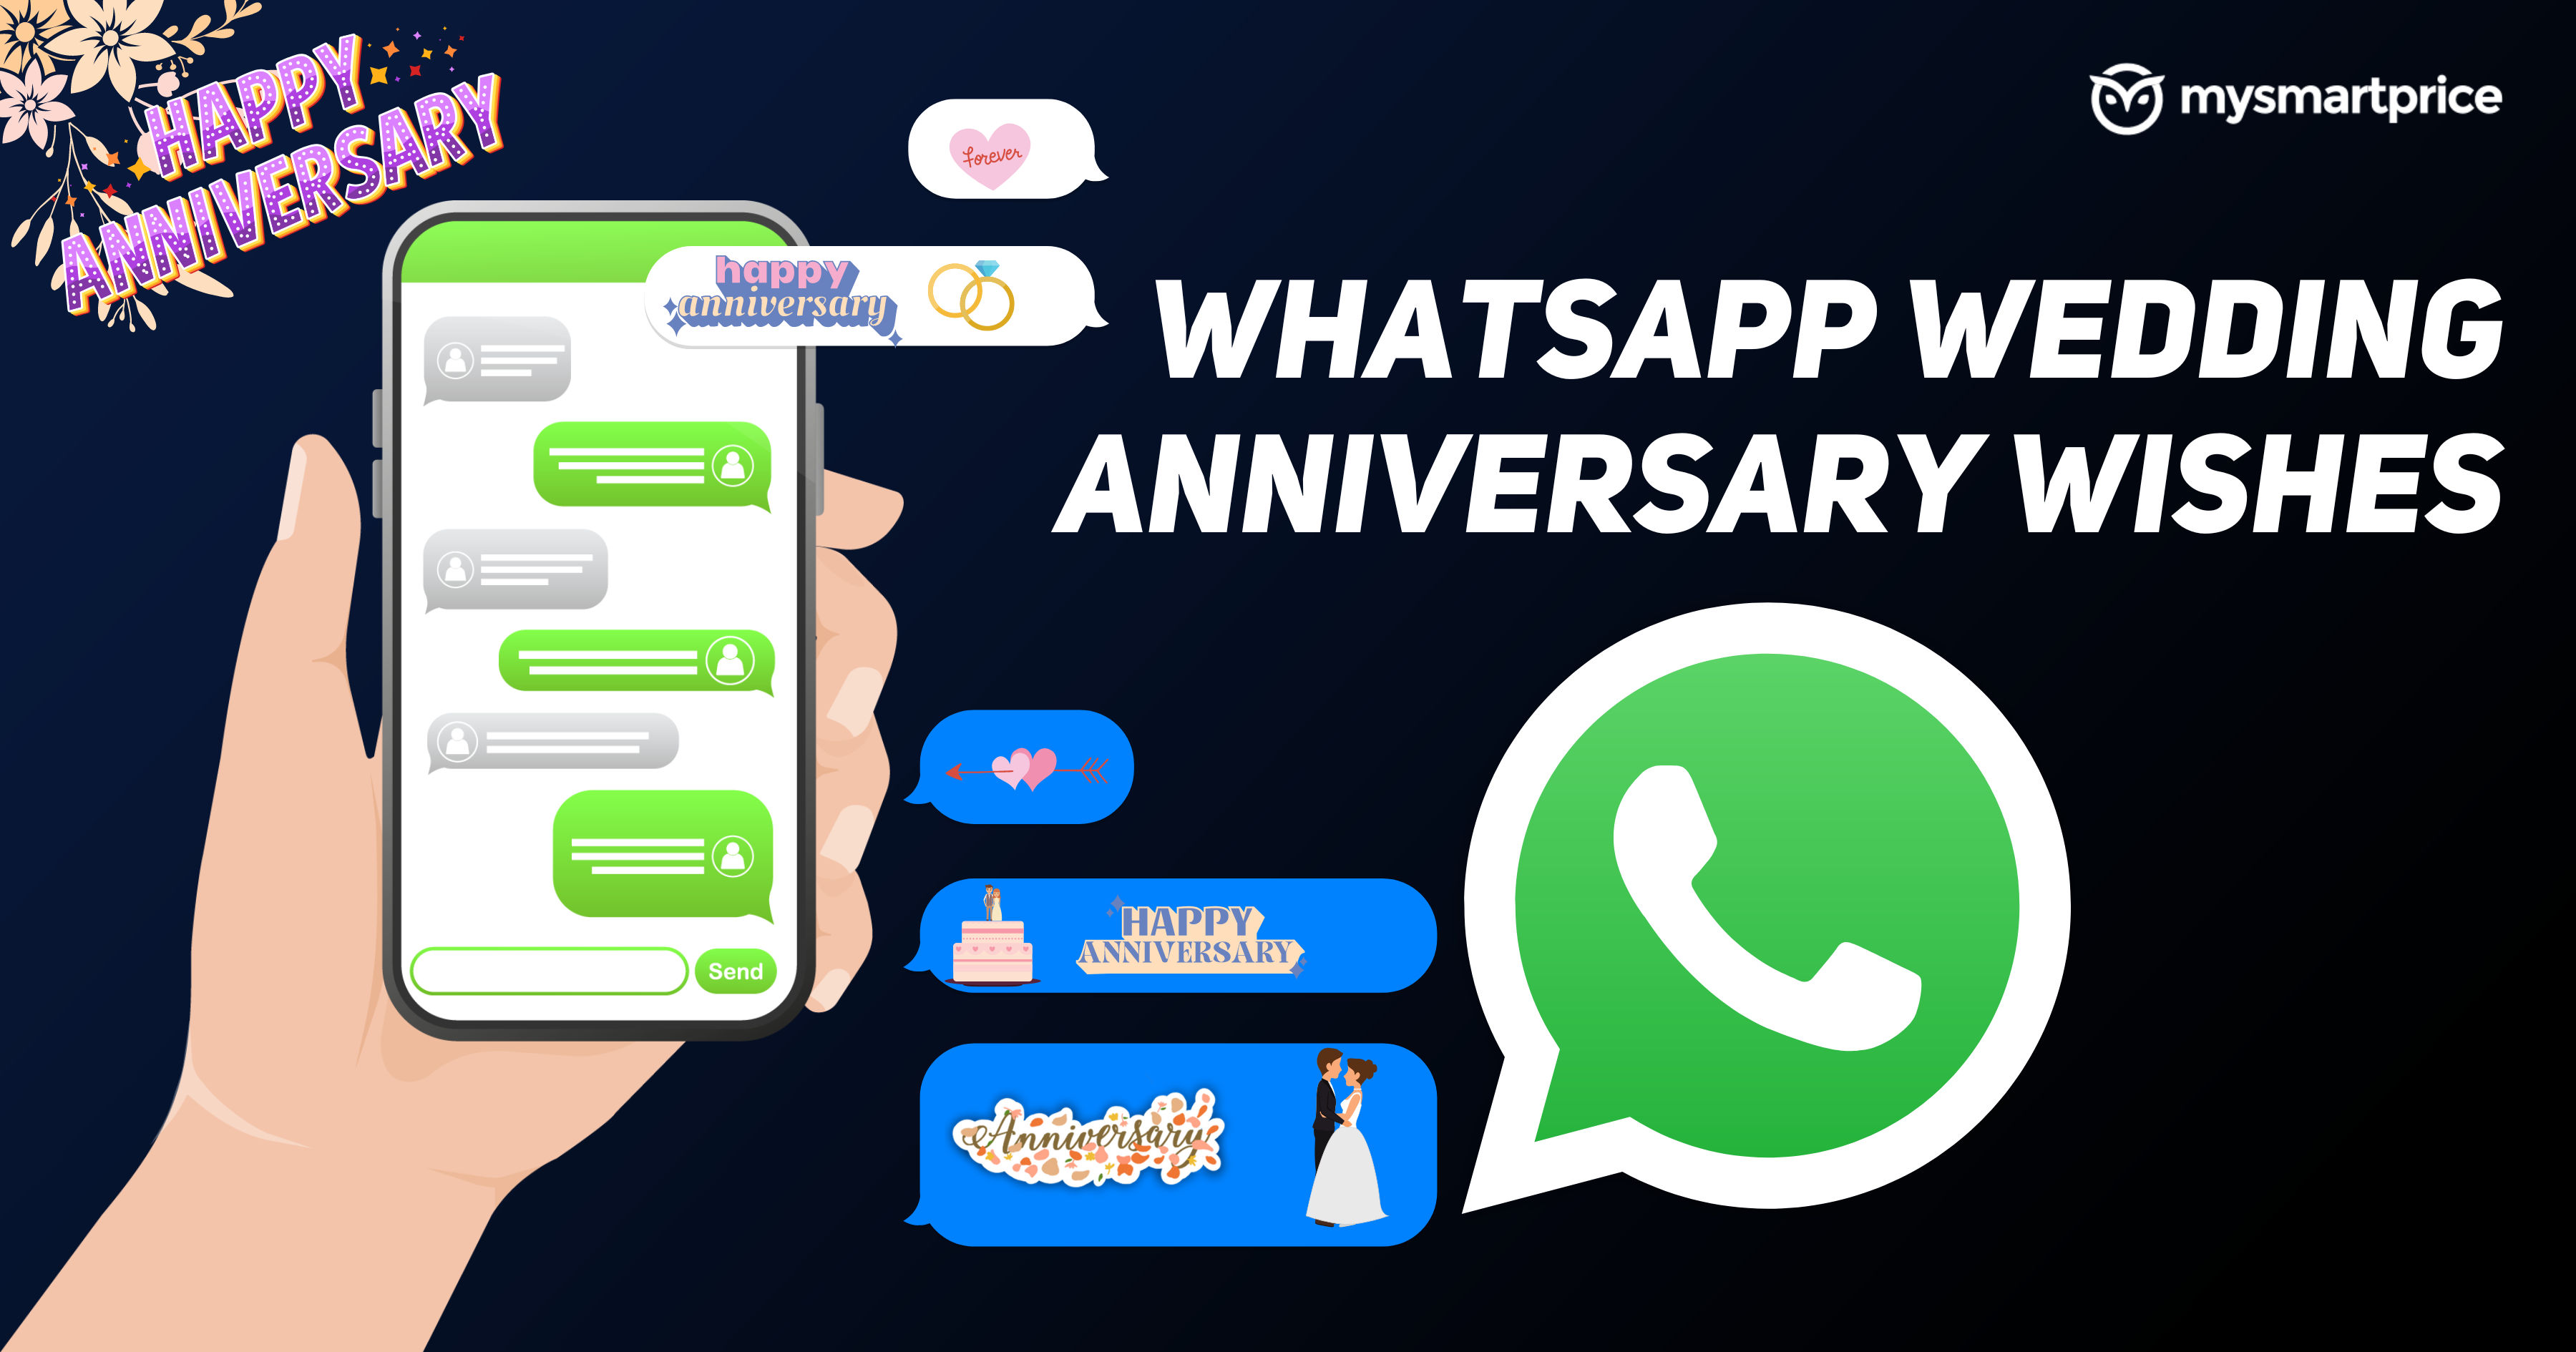 WhatsApp Wedding Anniversary Wishes: 140+ Wishes For Friends, Parents,  Couples, and More - MySmartPrice